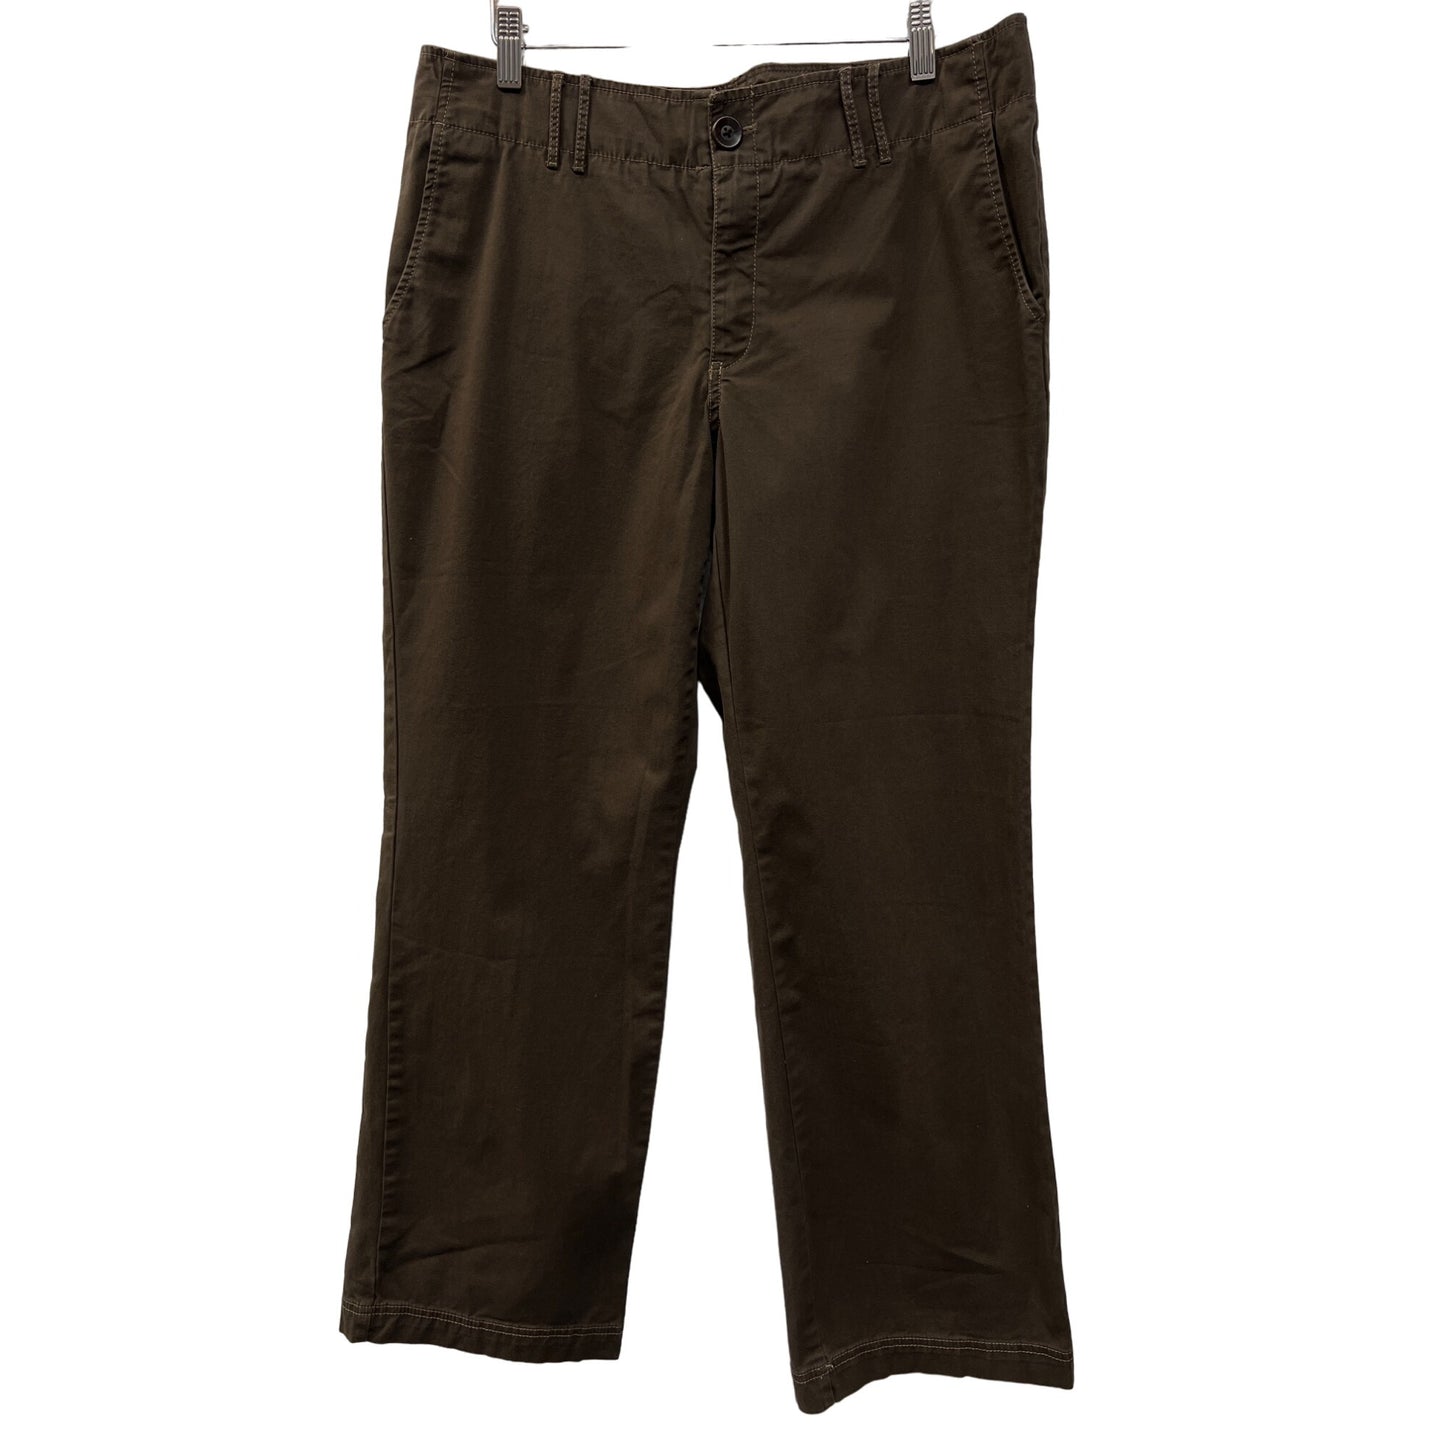 Eddie Bauer Brown Cotton Flat Front Chino Casual Pants